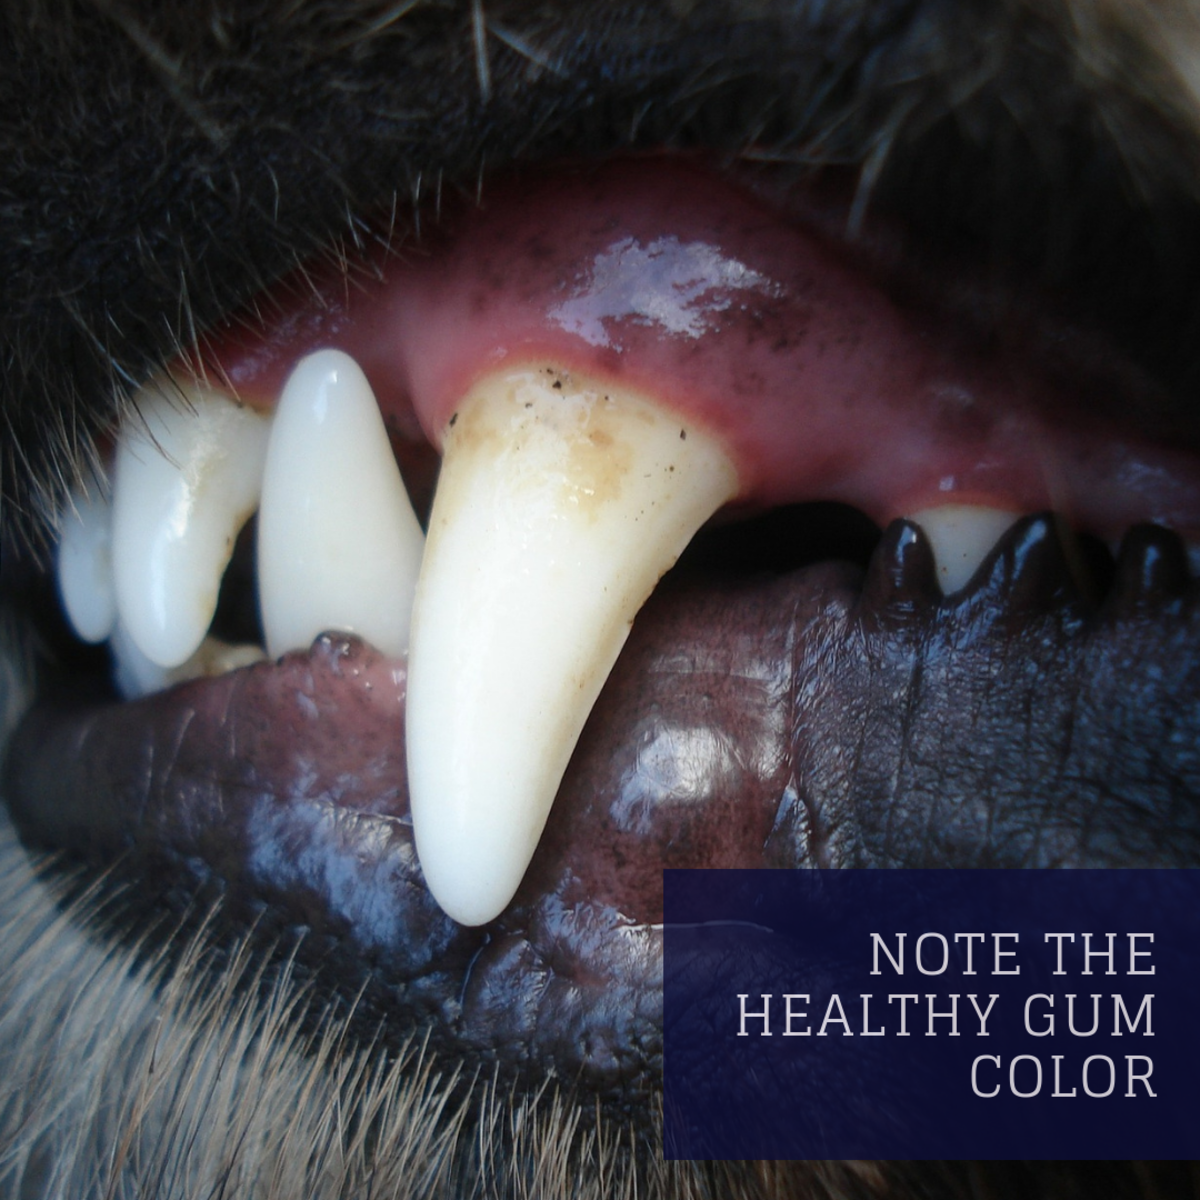 Gum color is a good indication of overall health or illness in dogs.